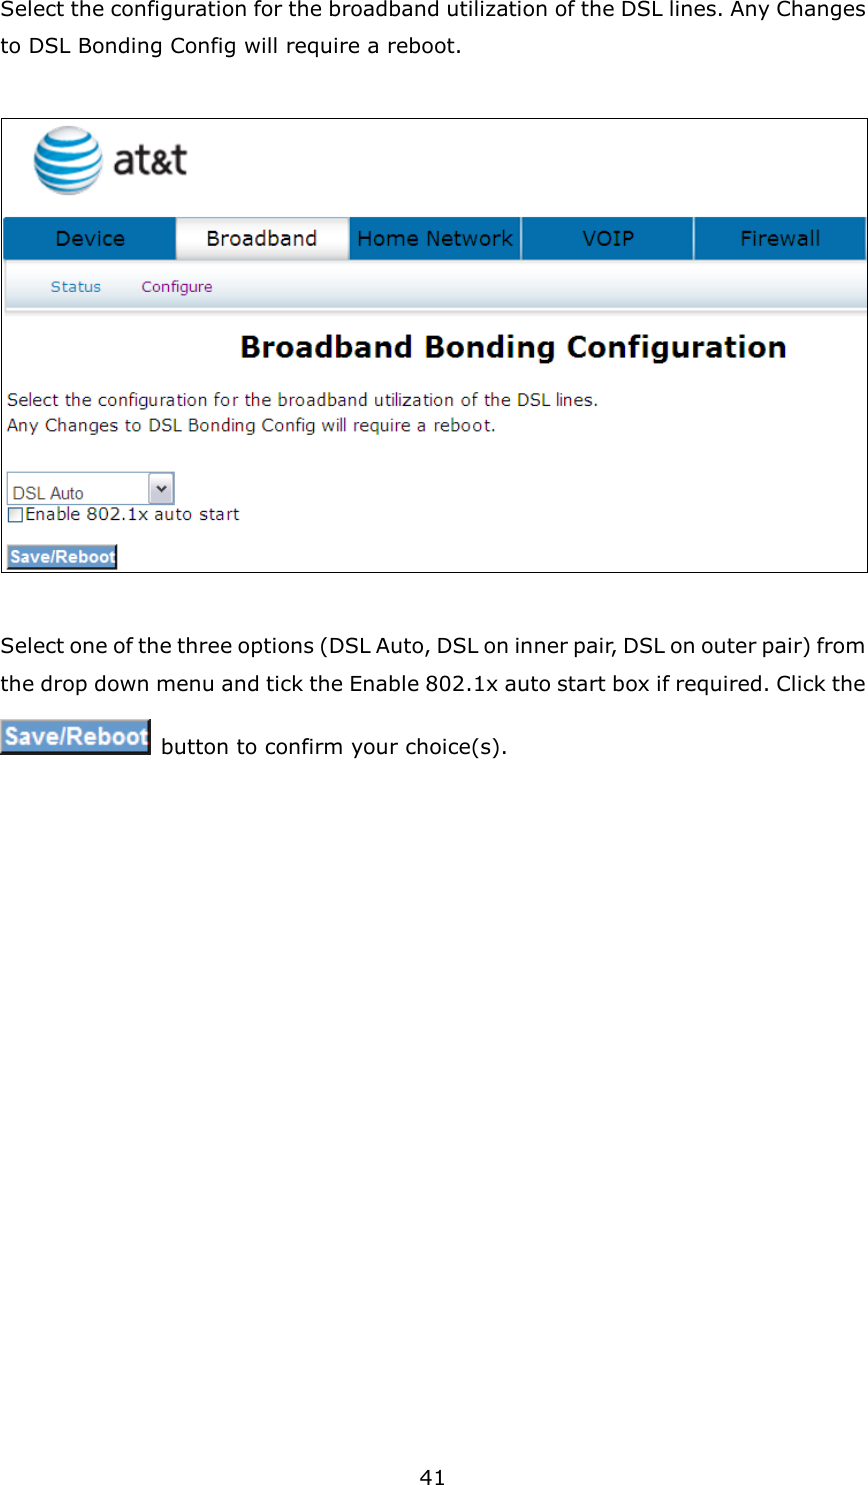 41 Select the configuration for the broadband utilization of the DSL lines. Any Changes to DSL Bonding Config will require a reboot.    Select one of the three options (DSL Auto, DSL on inner pair, DSL on outer pair) from the drop down menu and tick the Enable 802.1x auto start box if required. Click the   button to confirm your choice(s). 